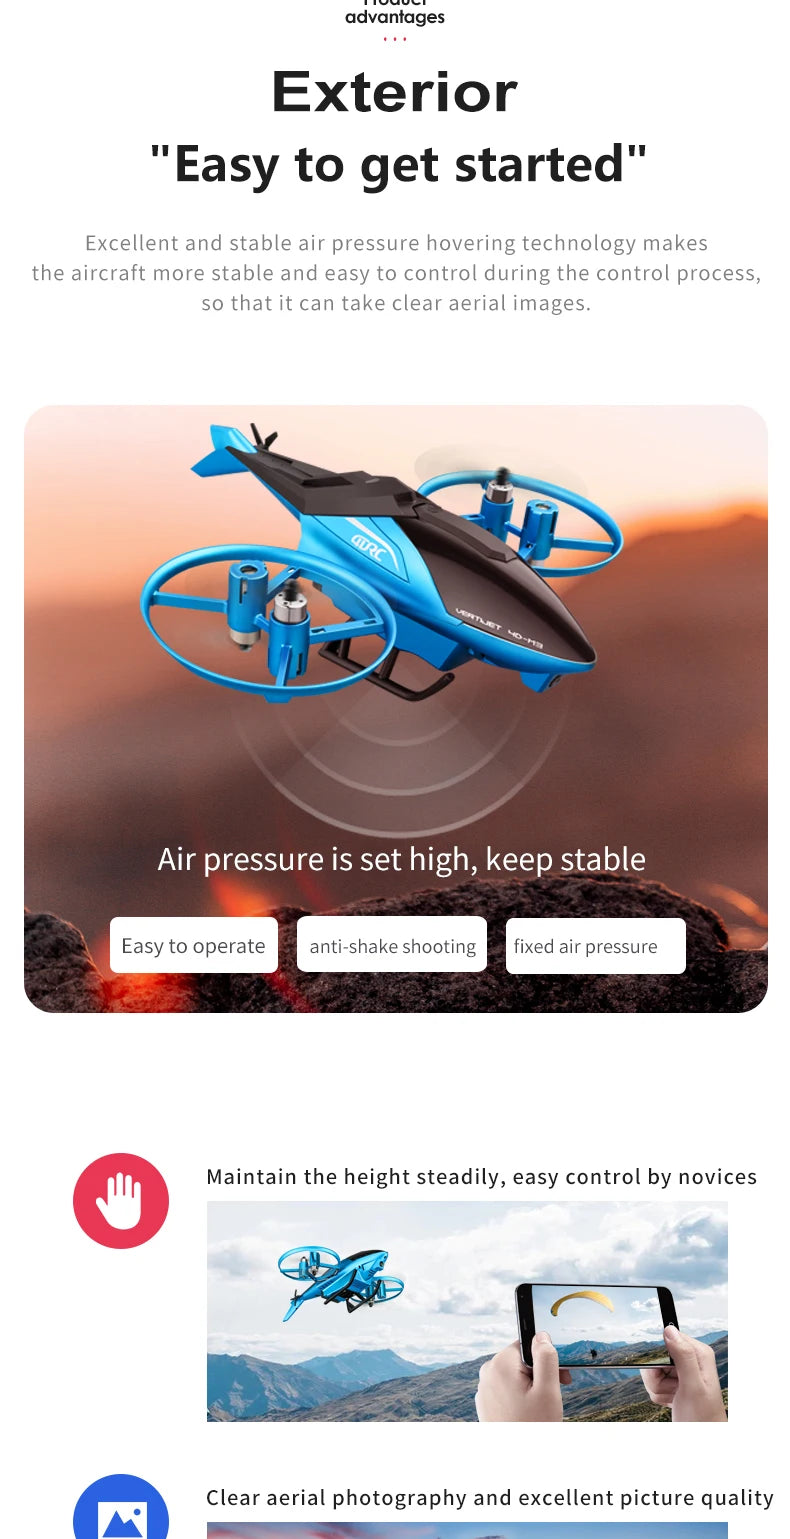 4DRC M3 RC Helicopter, excellent and stable air pressure hovering technology makes the aircraft more stable and easy to control .